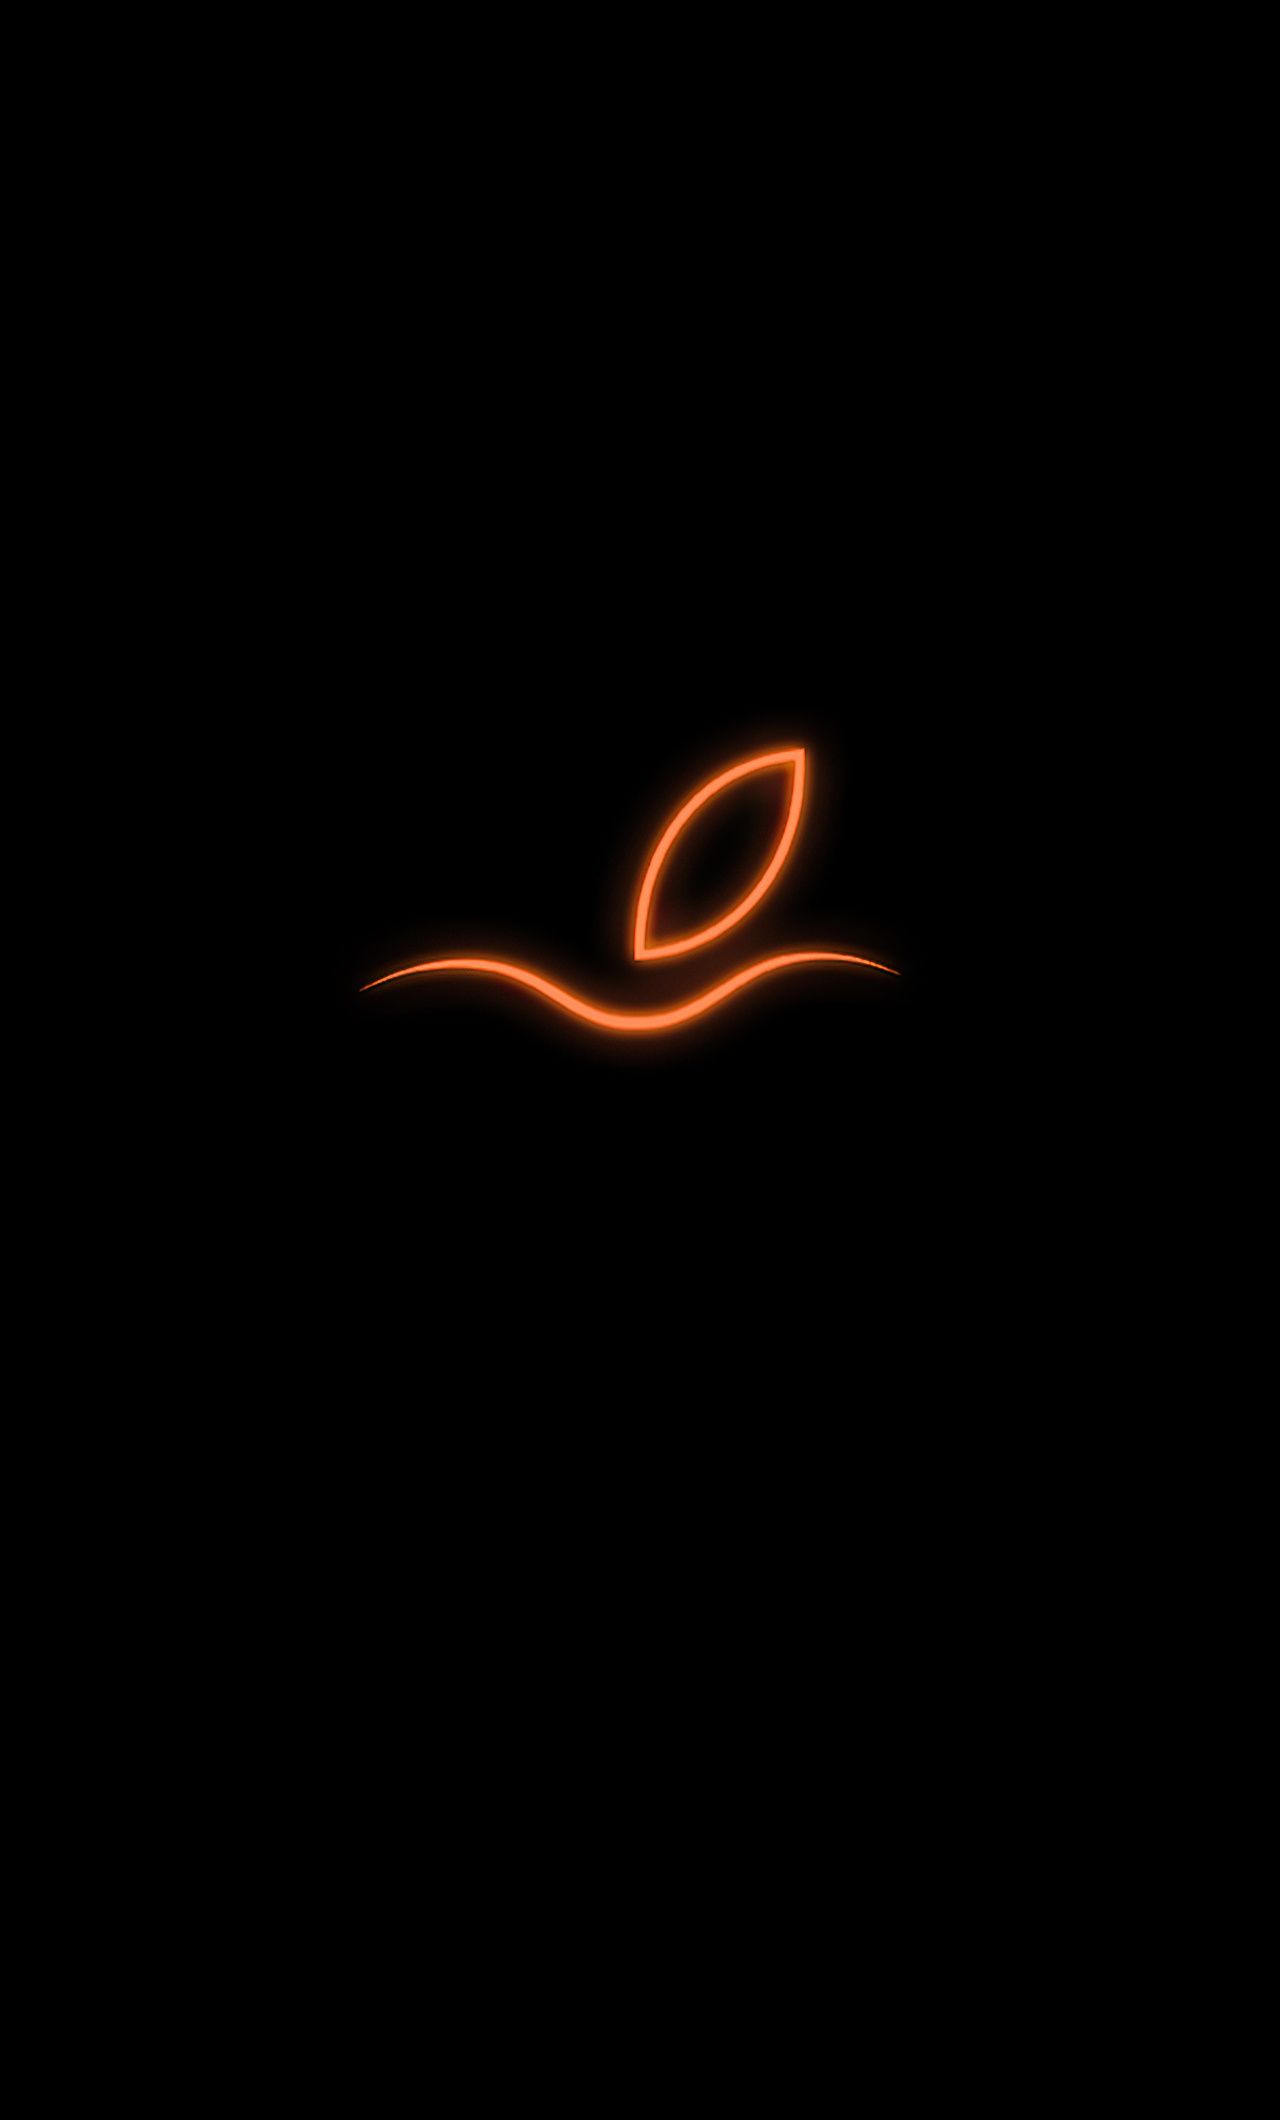 Glowing Apple Logo 4k iPhone HD 4k Wallpaper, Image, Background, Photo and Picture